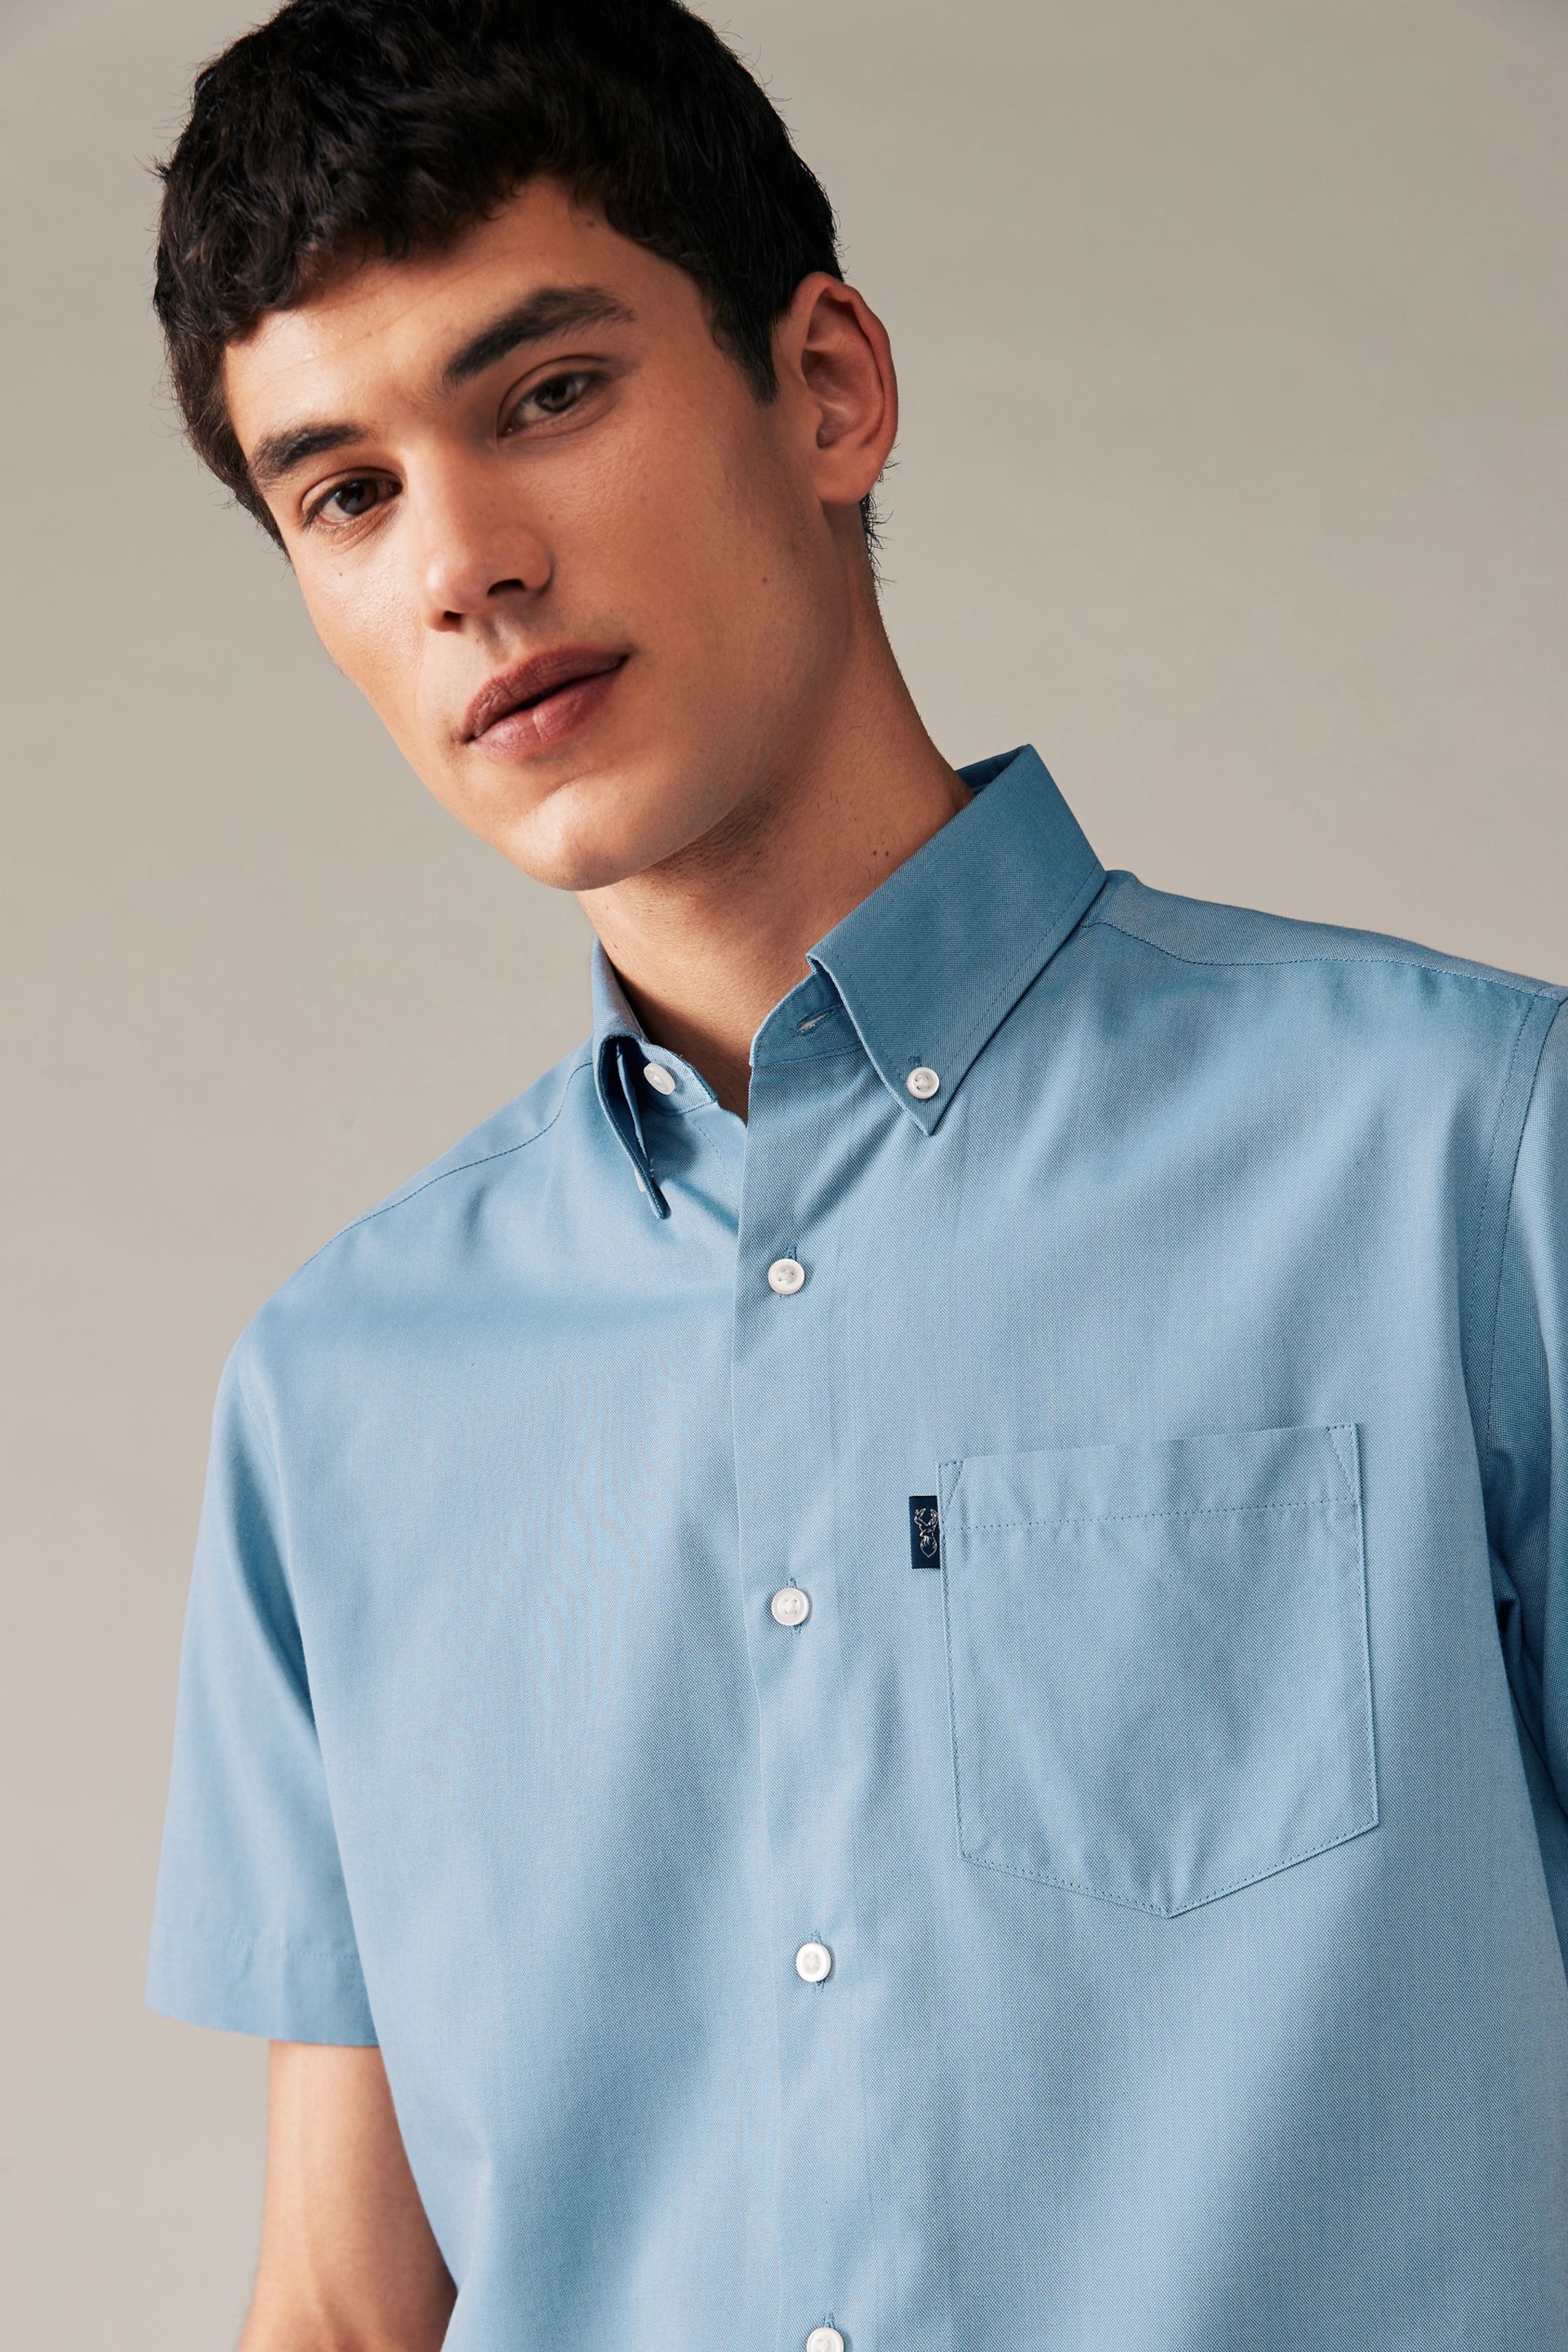 Dusky Blue Regular Fit Short Sleeve Easy Iron Button Down Oxford Shirt - Image 3 of 6